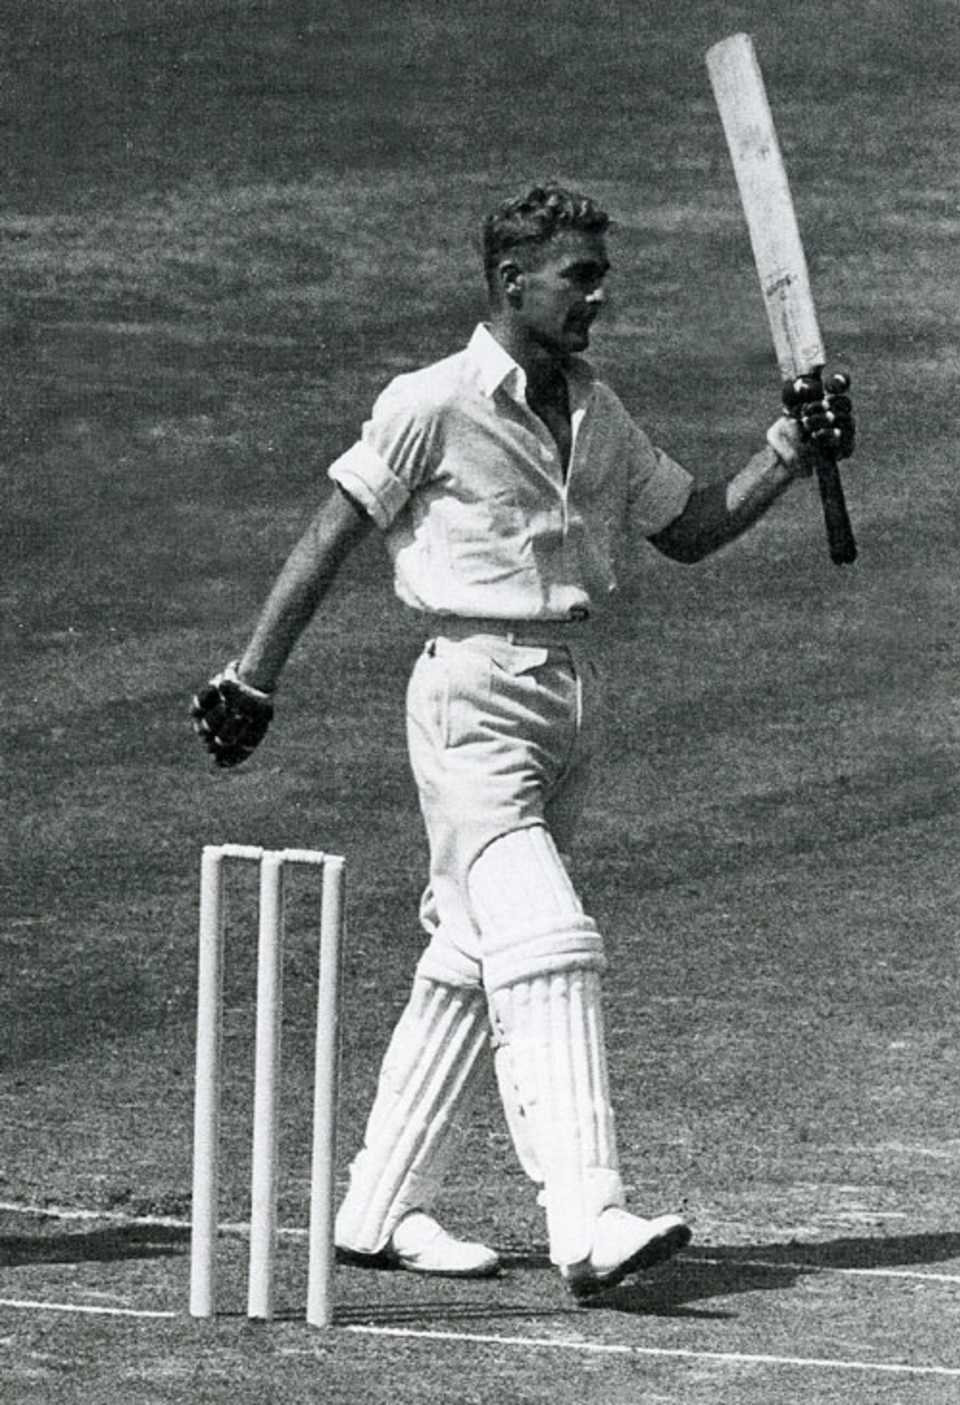 Bert Sutcliffe reaches his hundred, England v New Zealand, 3rd Test, Old Trafford, July 26, 1949